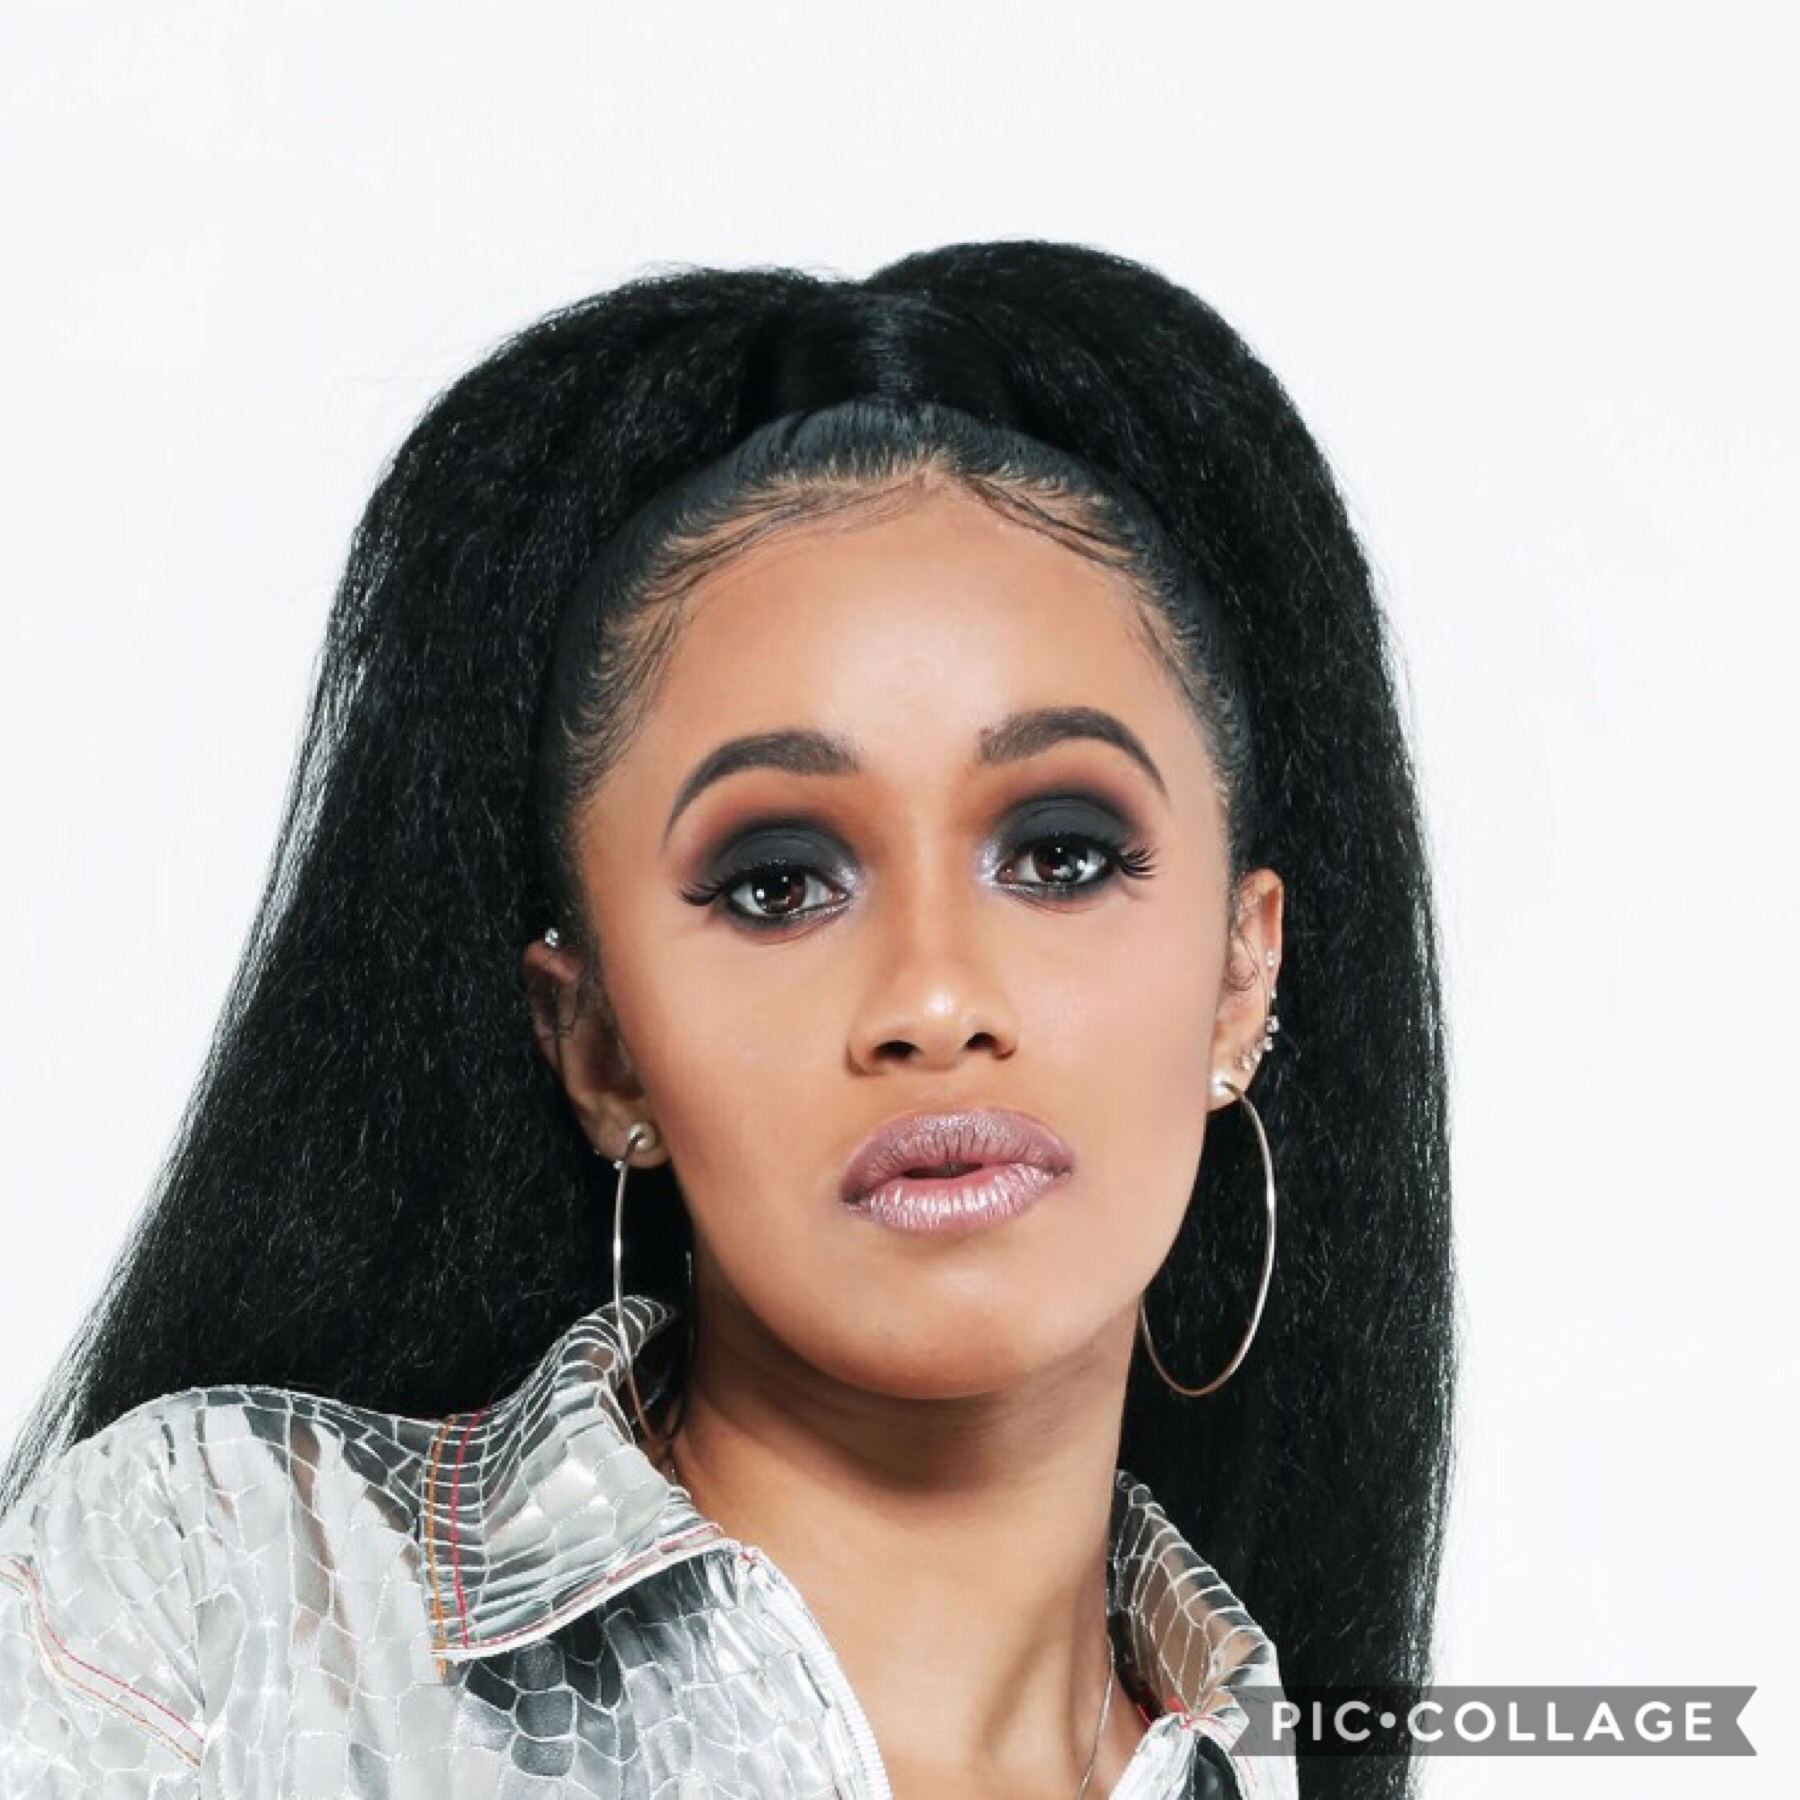 Congrats cardi for your beautiful daughter hope you and your fam have a wonderful time and happy to see the kid rapper just like you XOXO 